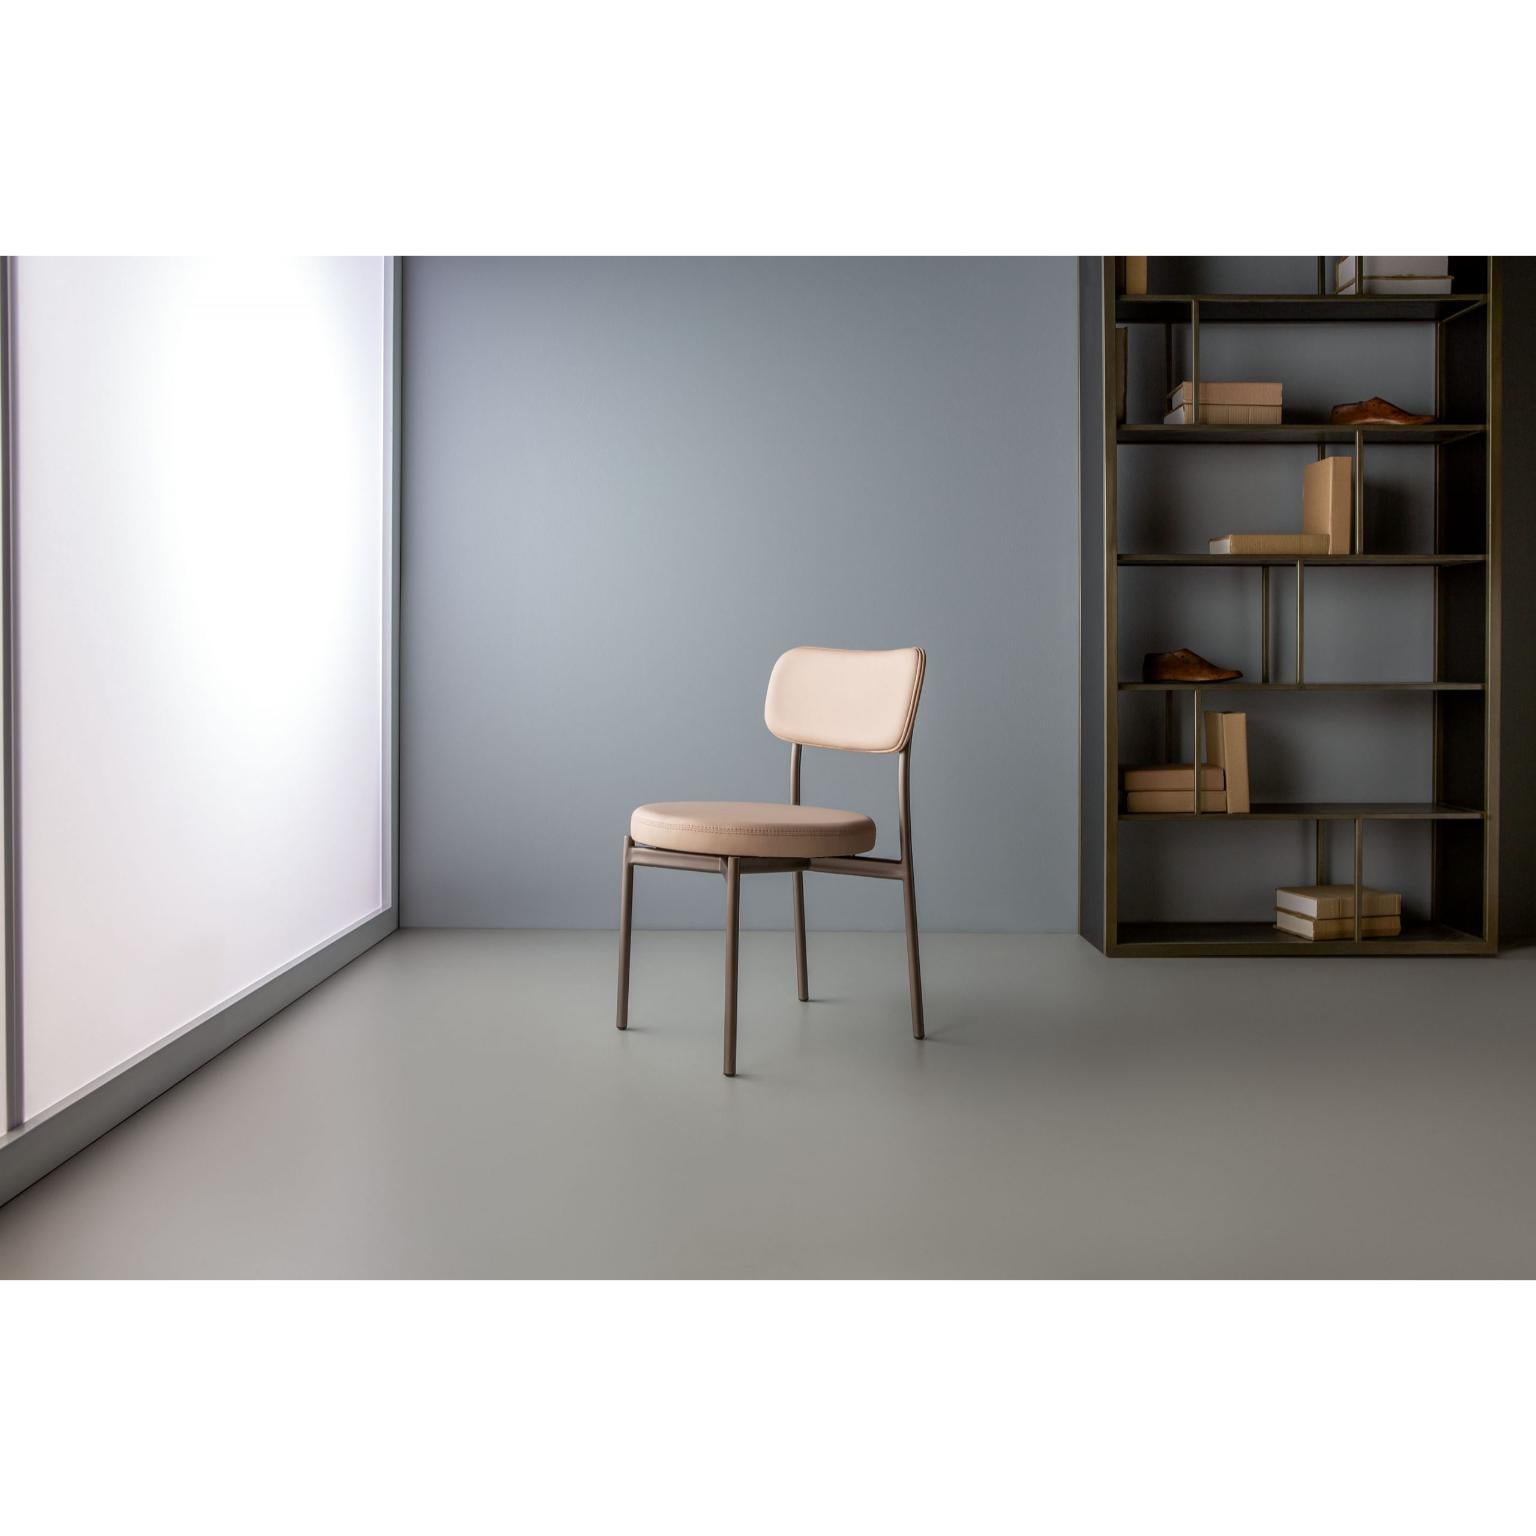 Jean Gin Chair by Doimo Brasil
Dimensions: W 49 x D 55 x H 77 cm 
Materials: Metal, Upholstered seat.


With the intention of providing good taste and personality, Doimo deciphers trends and follows the evolution of man and his space. To this end,